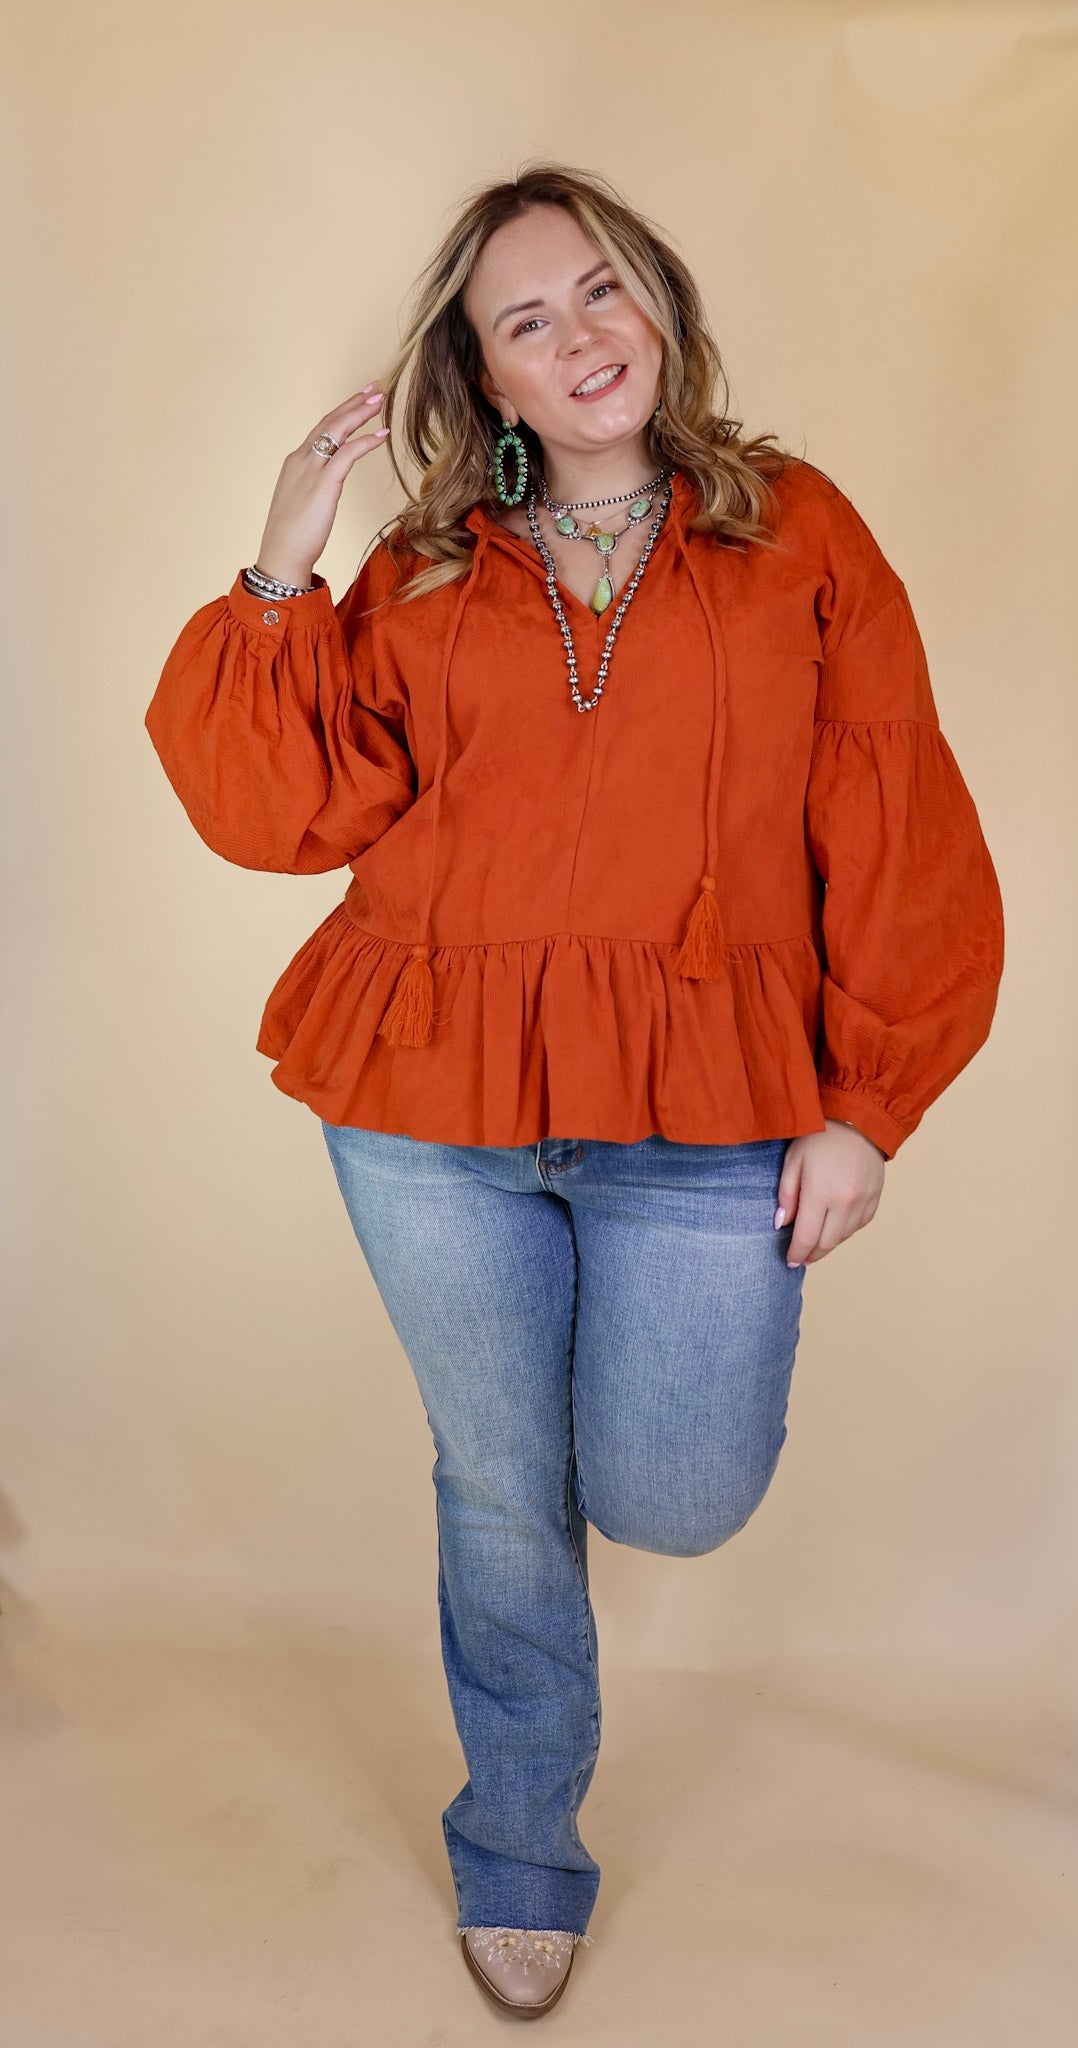 Free Fallin' Textured Long Sleeve Peplum Top with Keyhole Front in Orange - Giddy Up Glamour Boutique